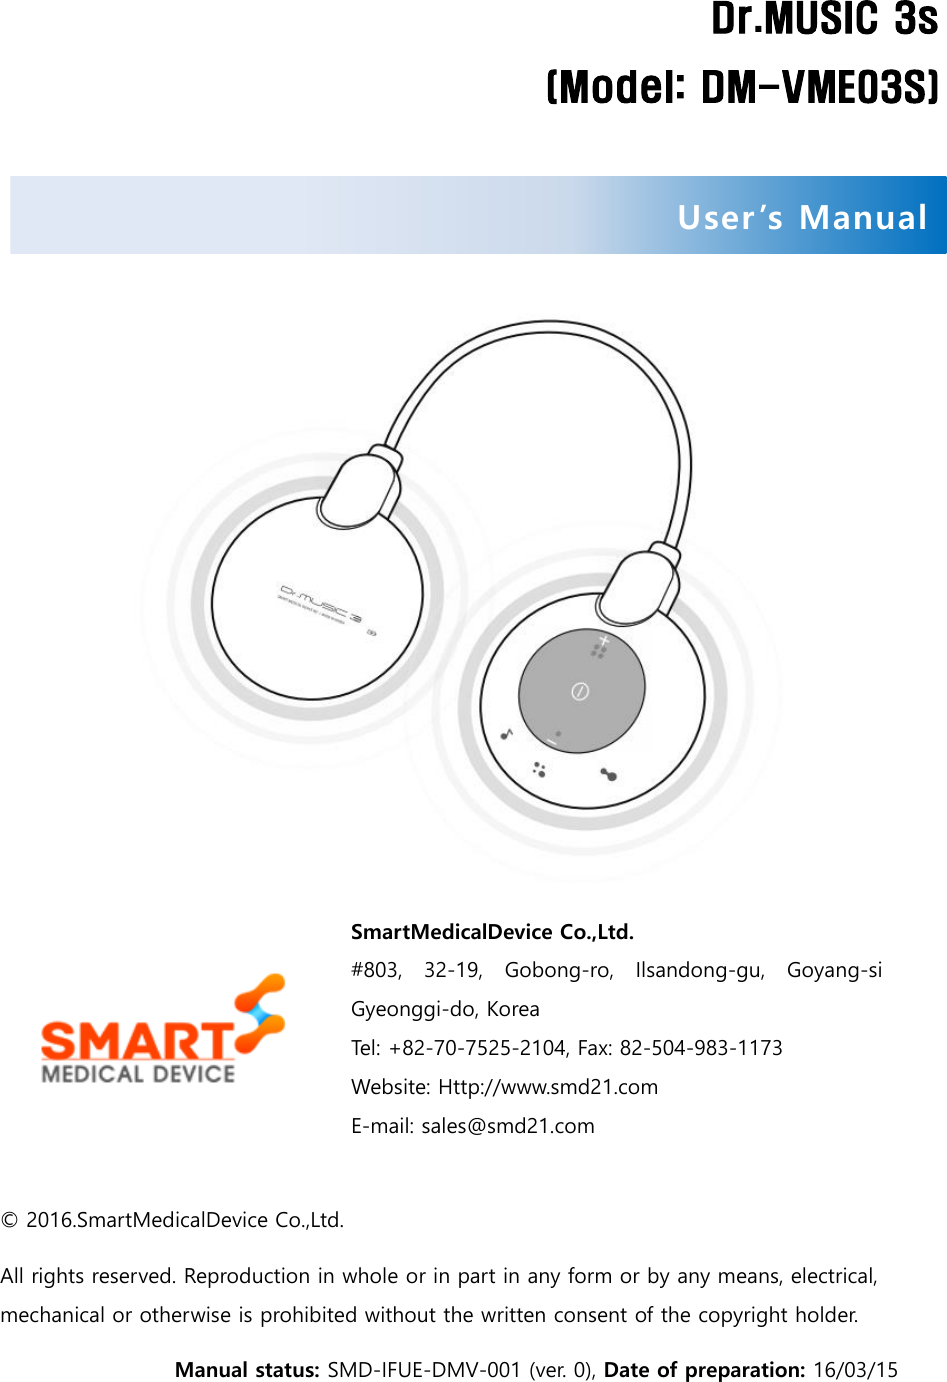   Dr.MUSIC 3s (Model: DM-VME03S)      SmartMedicalDevice Co.,Ltd.   #803,  32-19,  Gobong-ro,  Ilsandong-gu,  Goyang-si Gyeonggi-do, Korea Tel: +82-70-7525-2104, Fax: 82-504-983-1173 Website: Http://www.smd21.com E-mail: sales@smd21.com  © 2016.SmartMedicalDevice Co.,Ltd. All rights reserved. Reproduction in whole or in part in any form or by any means, electrical, mechanical or otherwise is prohibited without the written consent of the copyright holder.Manual status: SMD-IFUE-DMV-001 (ver. 0), Date of preparation: 16/03/15 User ’s Manual  